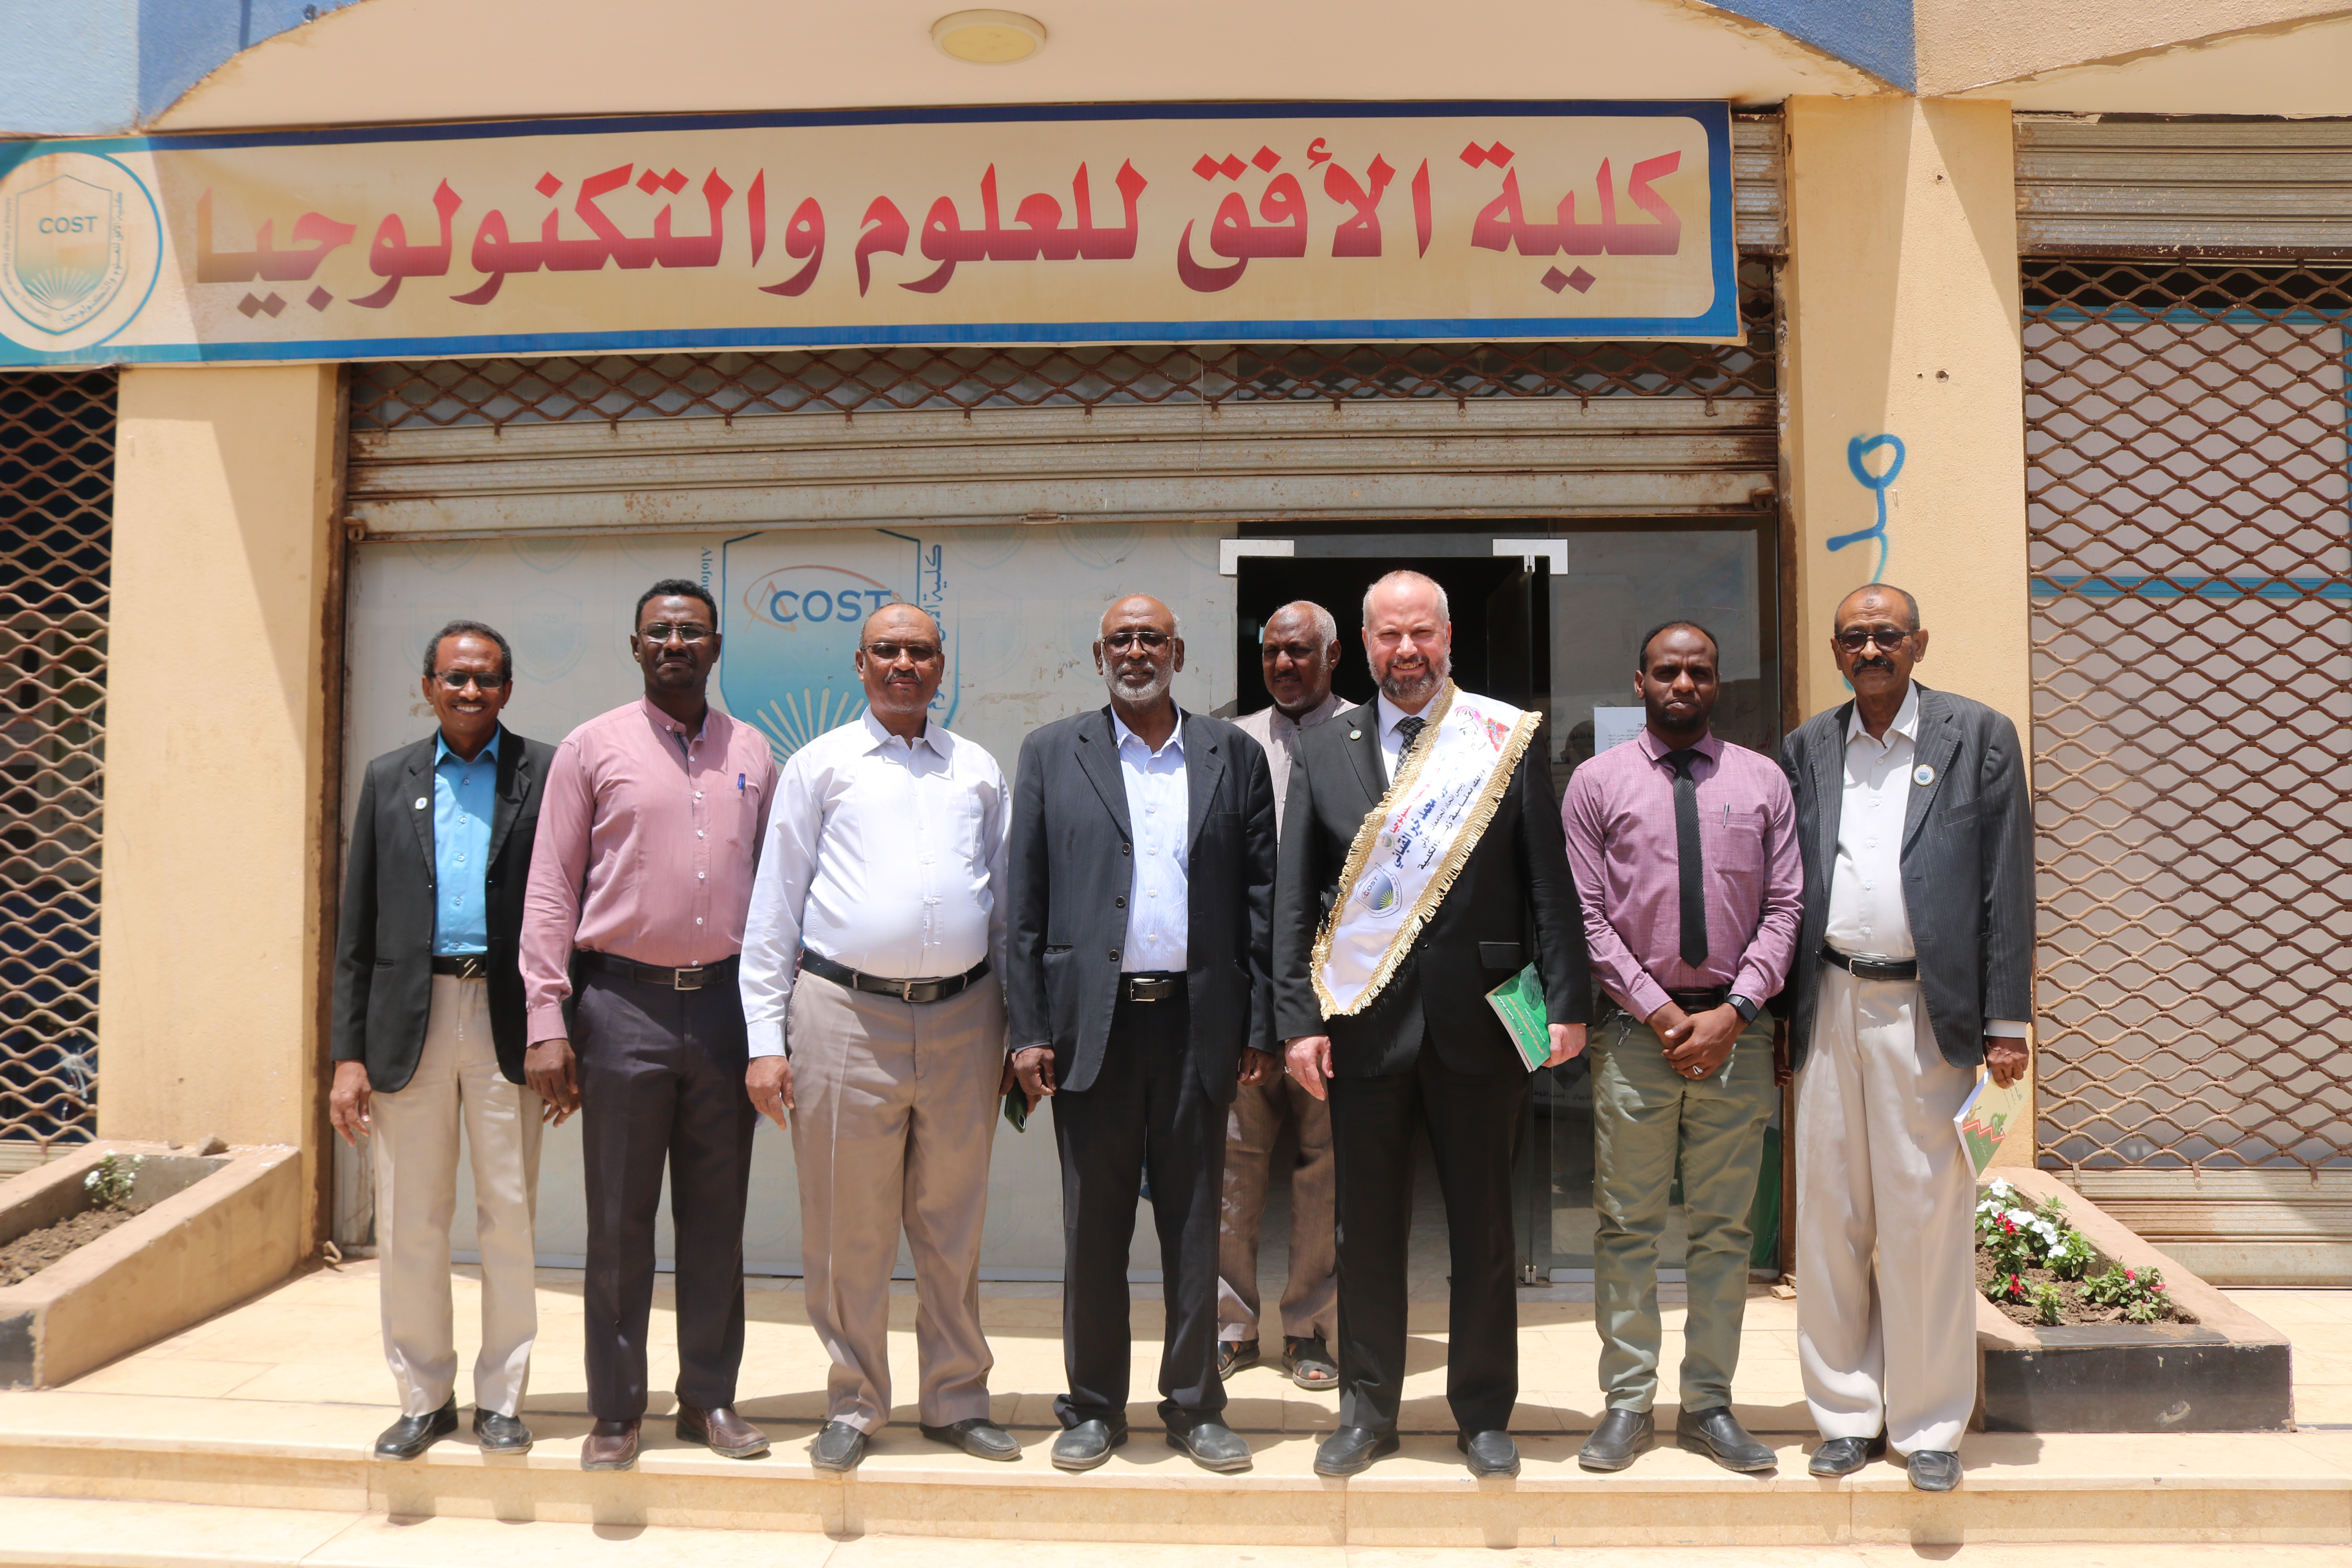 The President of the International University Association visits alofoug College for Science and Technology